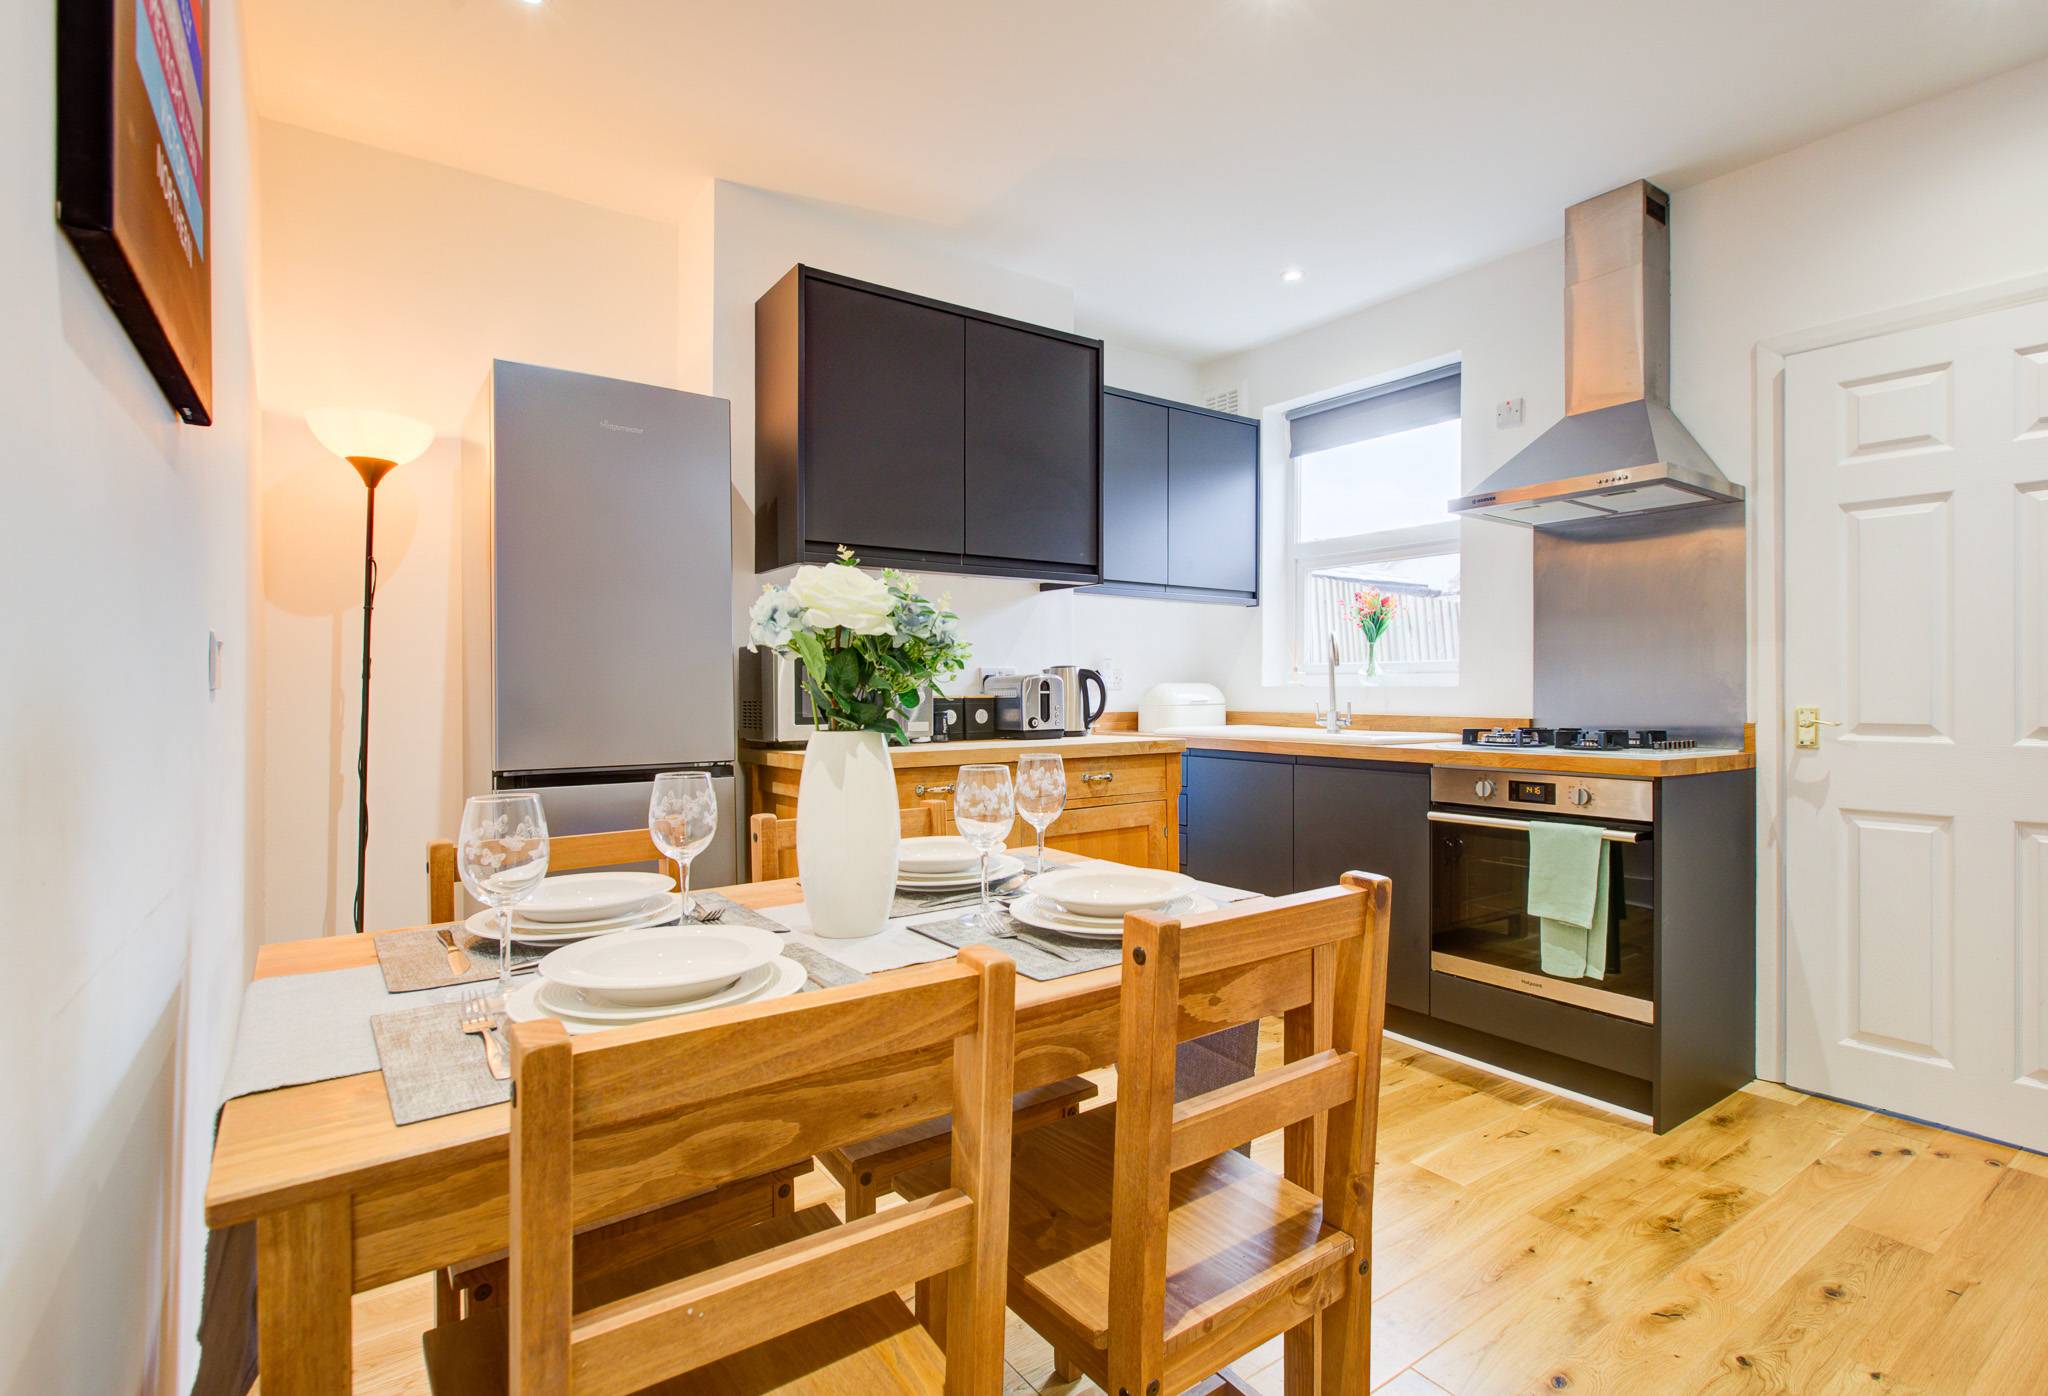 Statera Apartments - Statera Apartments - 2-Bed House in Stratford